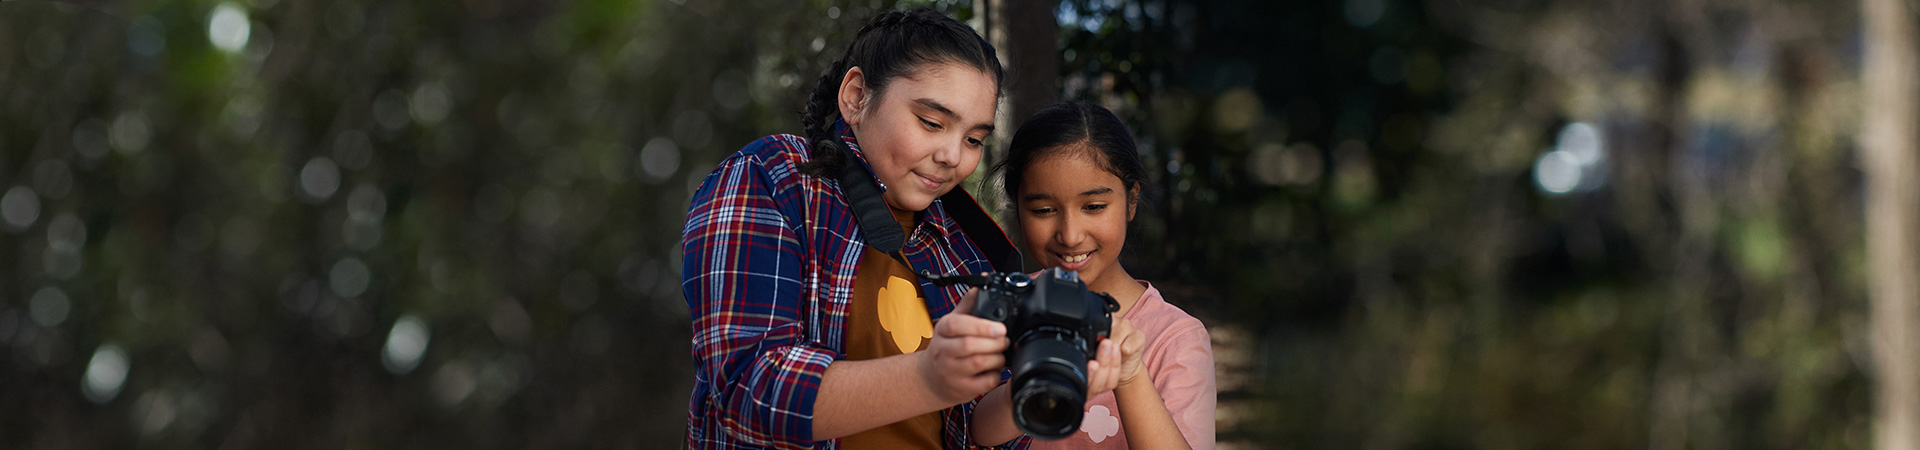  an older Girl Scout showing a younger girl a photo she took on a camera 